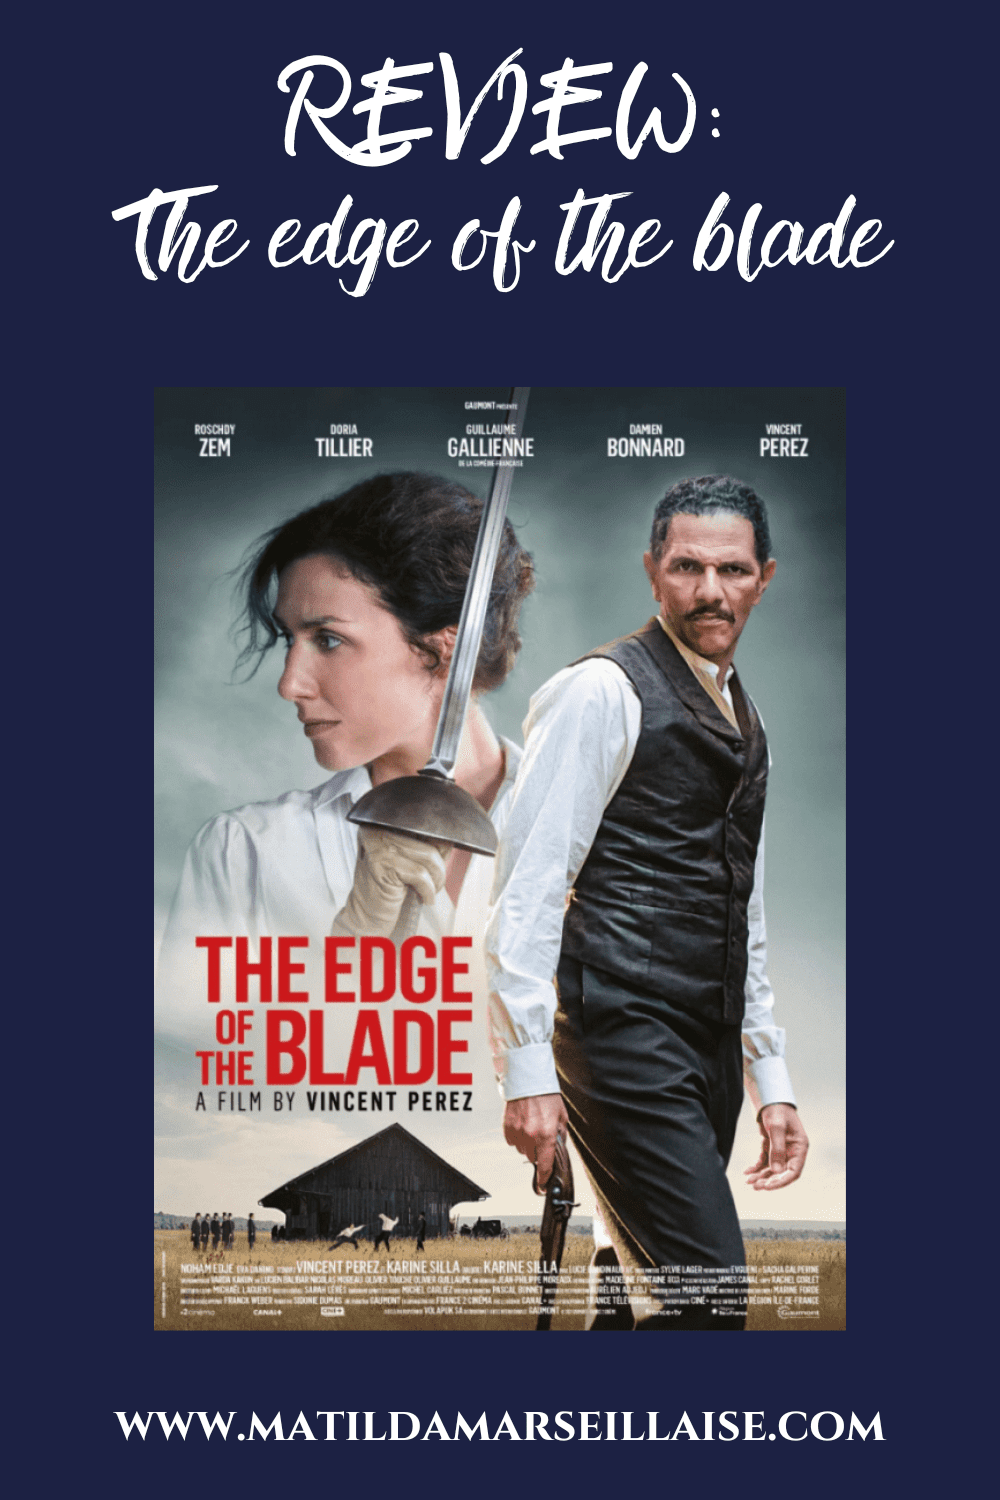 The Edge of the Blade is a film about honour, revenge and the fight for women’s rights